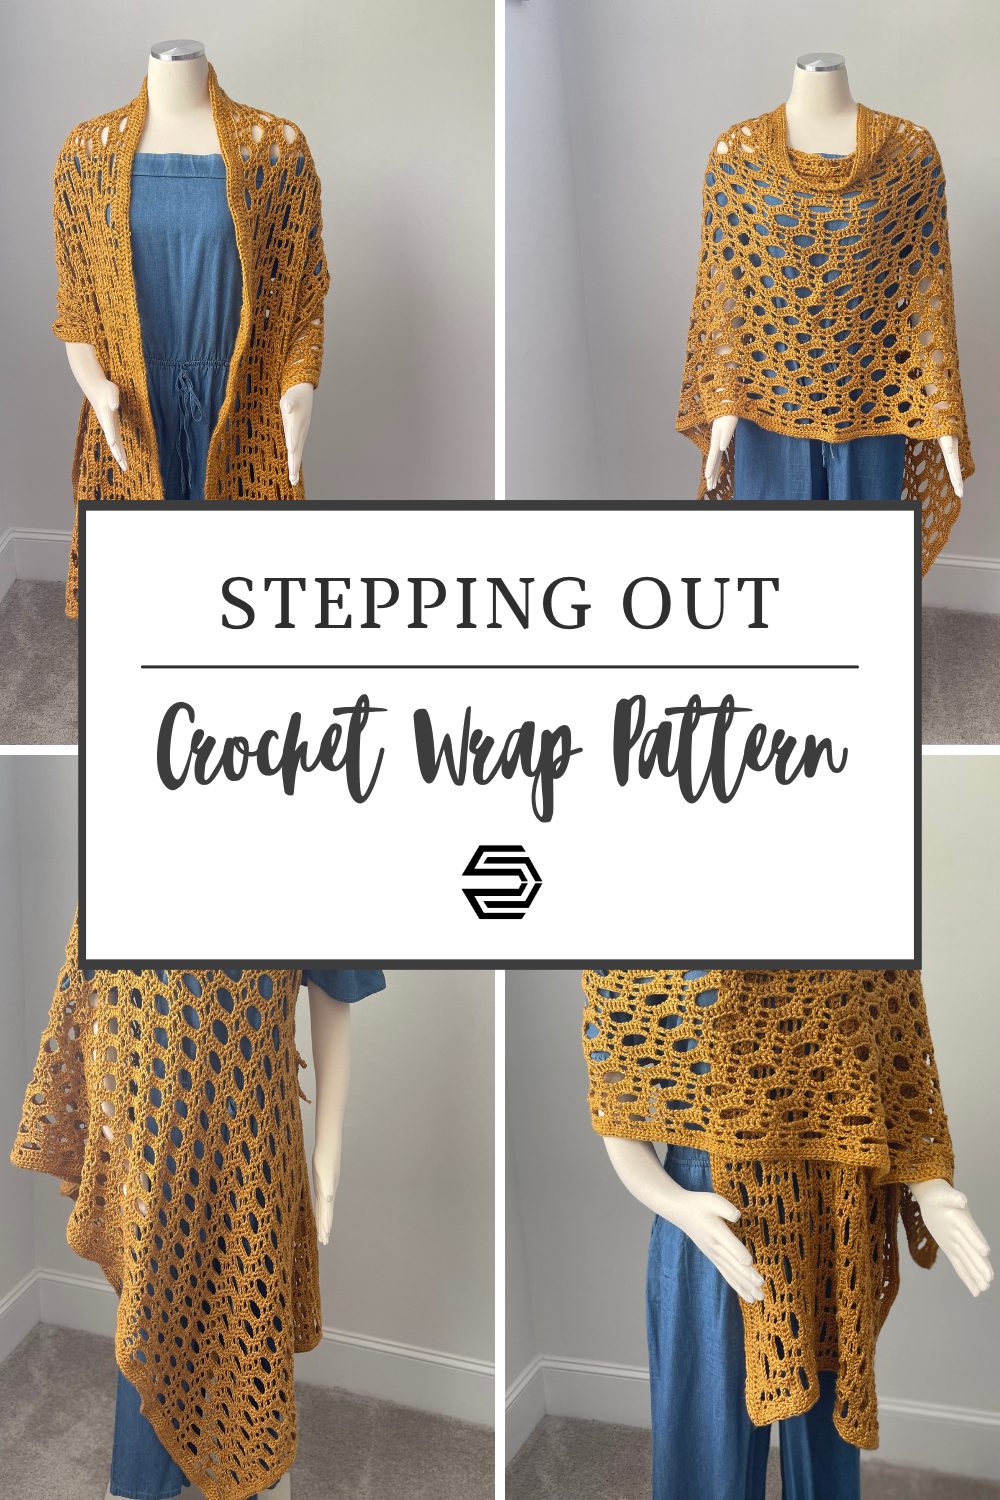 An image with a four grid of the Stepping Out Crochet Wrap. One image displays the crochet wrap draped across the shoulders and arms of a mannequin. The second image shows the crochet wrap with the length at the front and each end at the back. The third image shows the crochet wrap draped on one shoulder and tied underneath the arm. The fourth image shows the crochet wrap like a wide scarf around the neck.